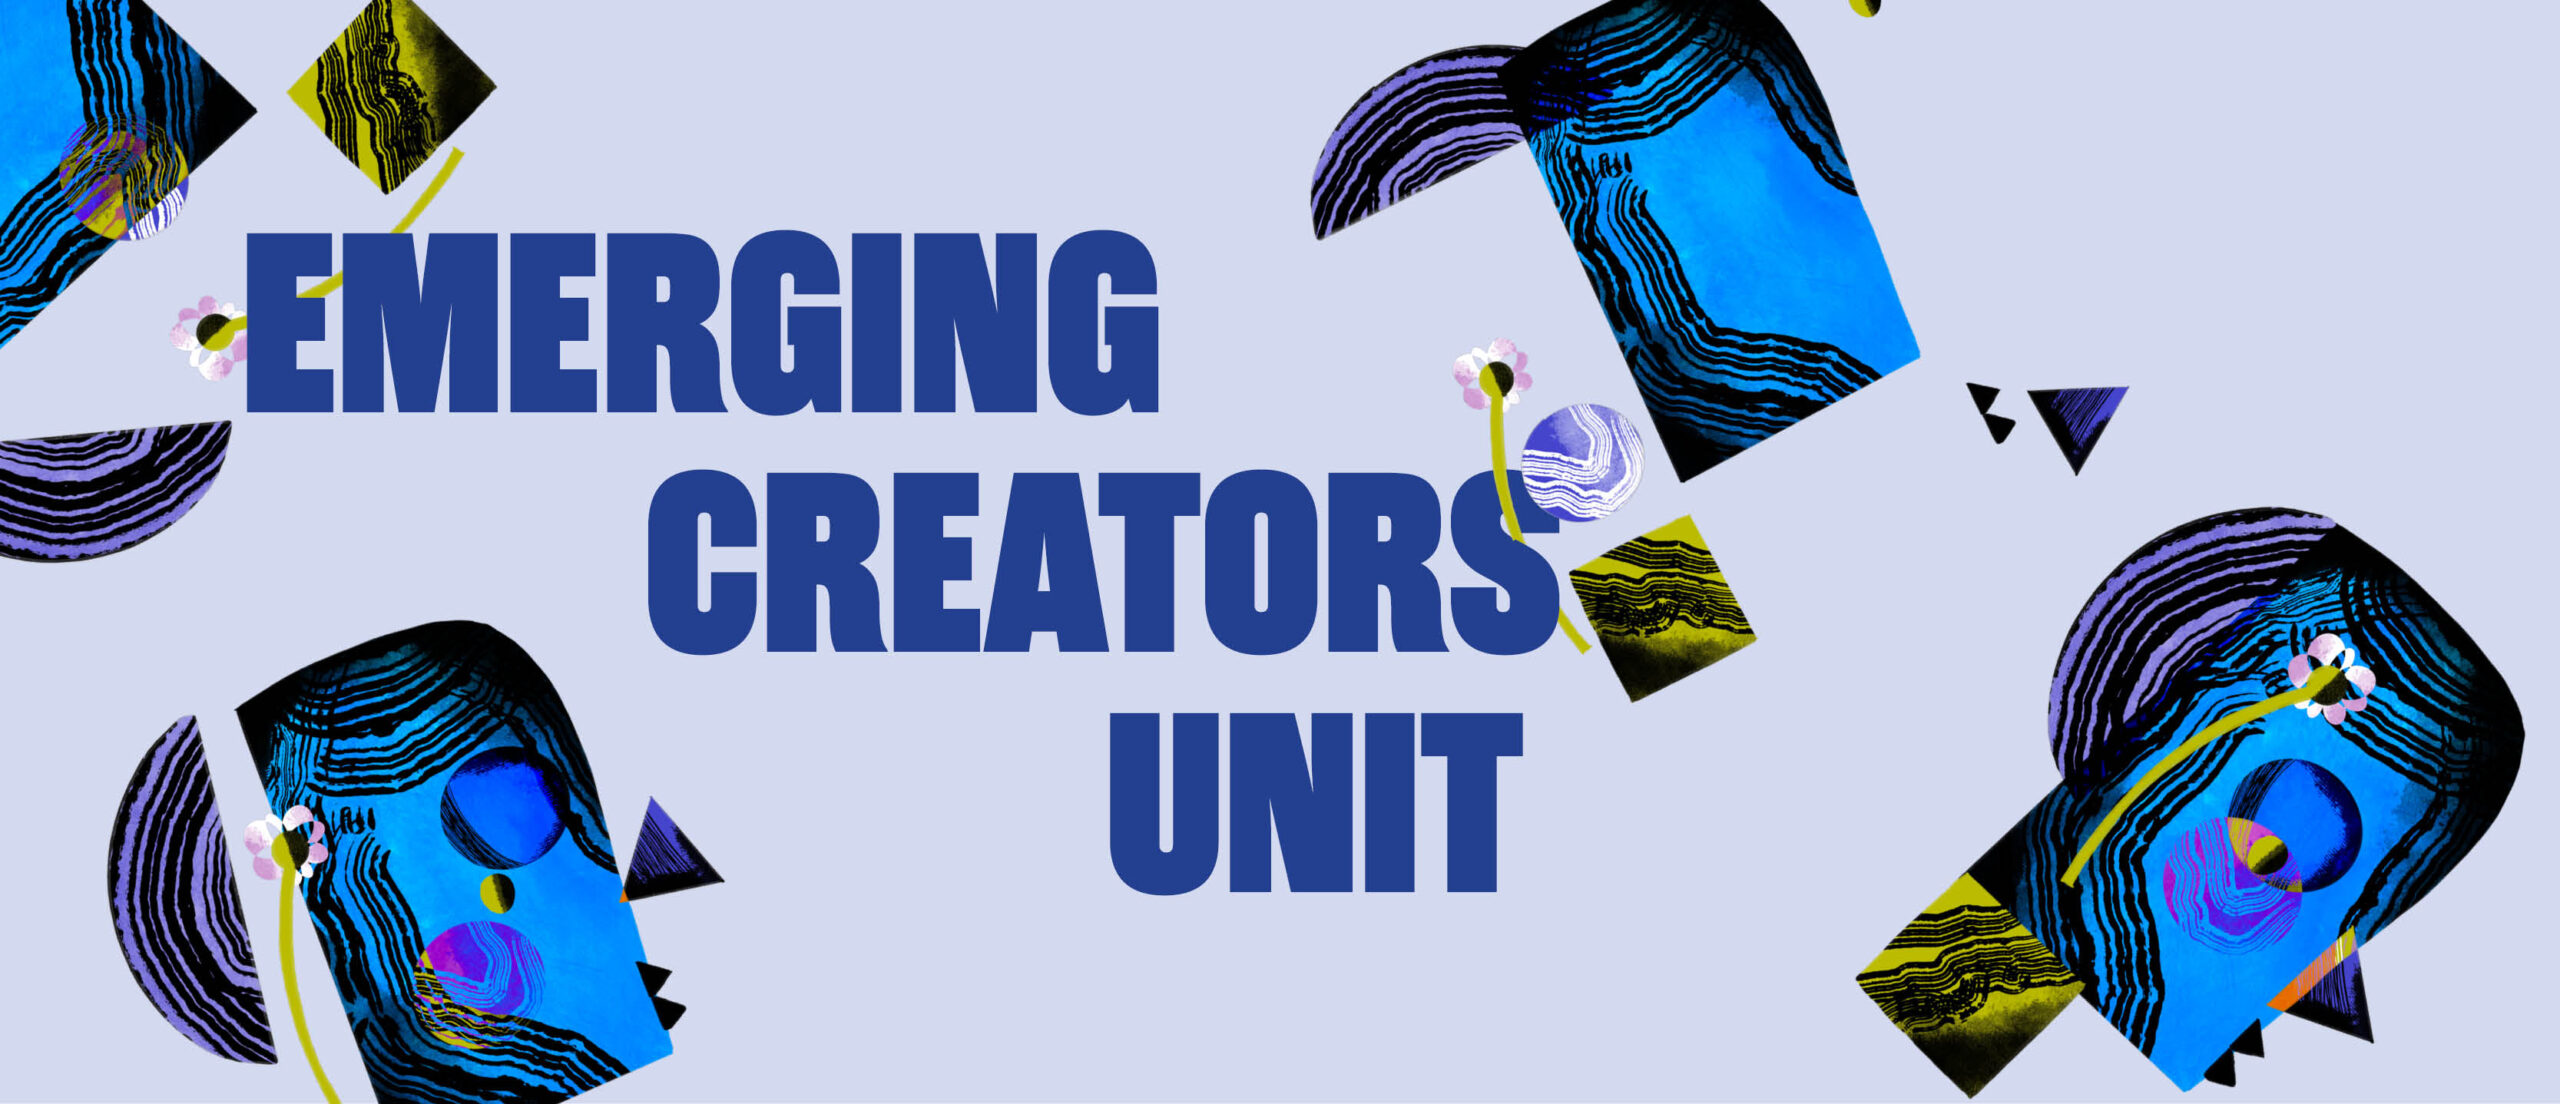 Dark blue text on a light blue background reads "Emerging Creators Unit", around the text are geometric shapes in blues and greens that come together to create faces.